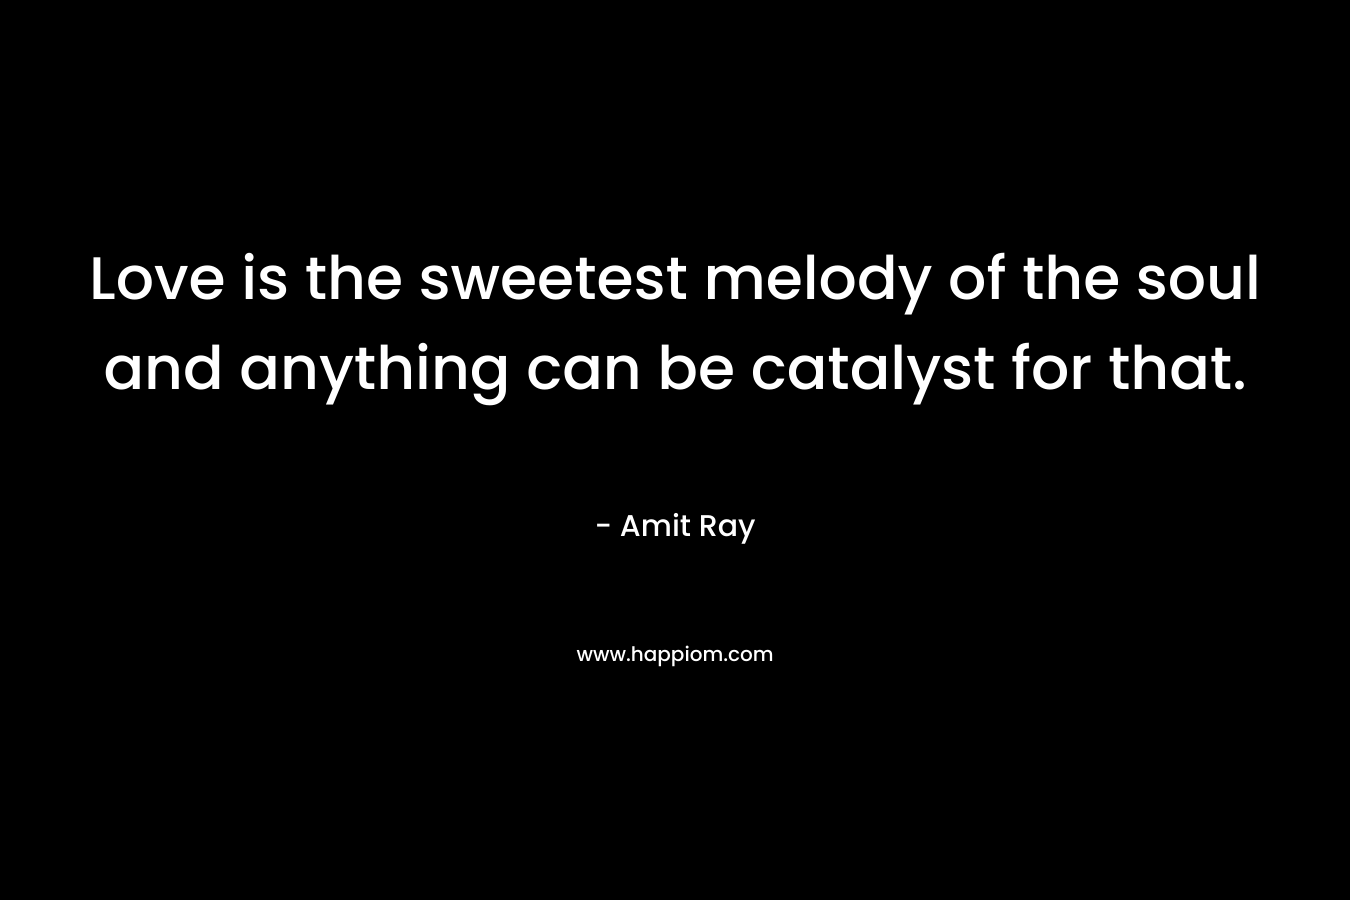 Love is the sweetest melody of the soul and anything can be catalyst for that.